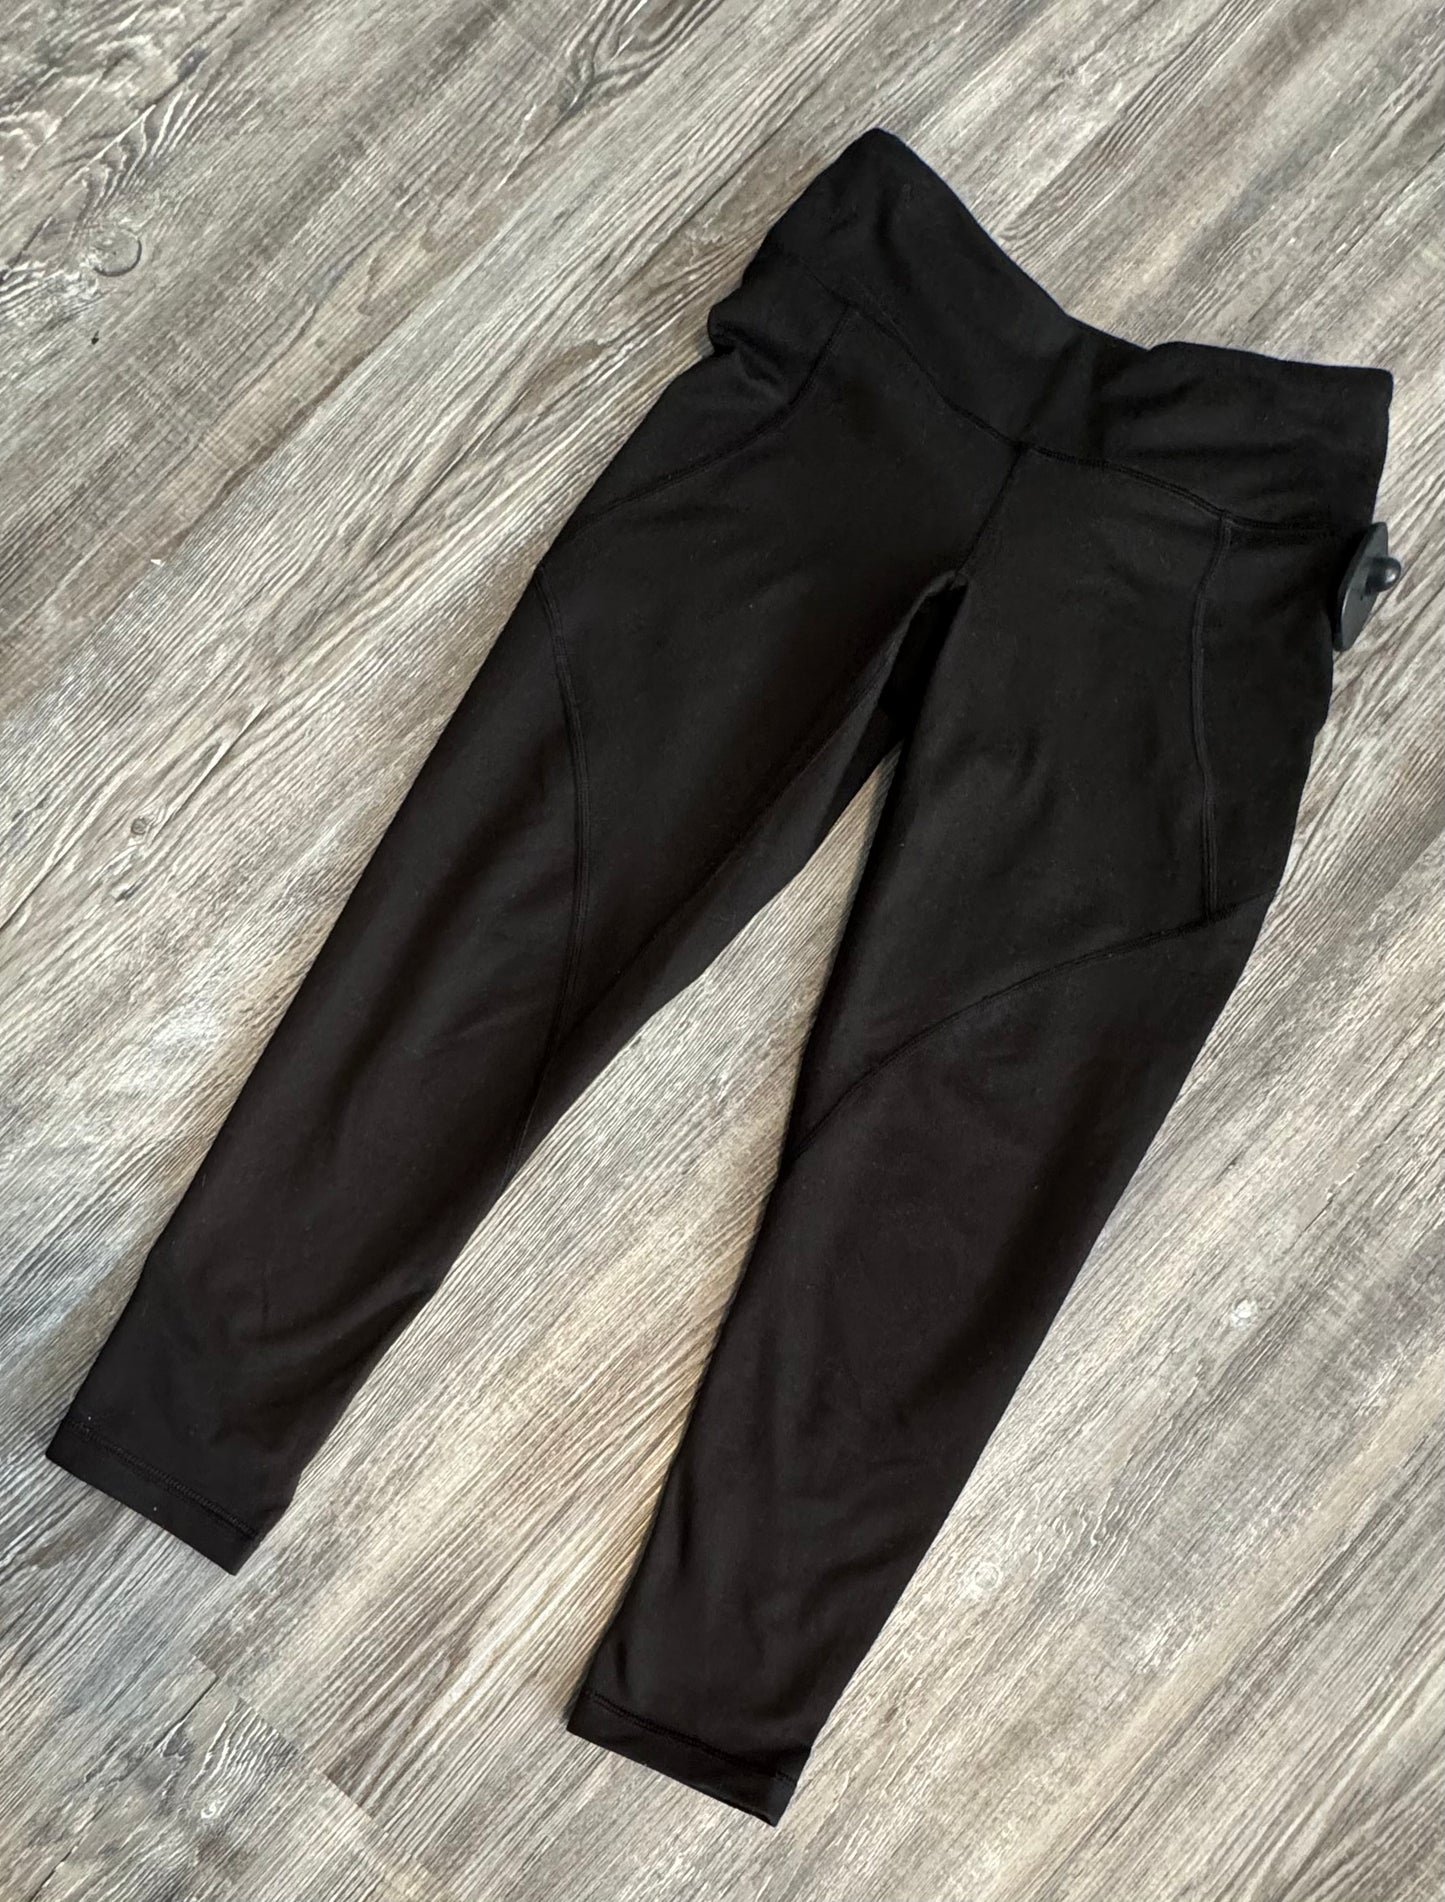 Athletic Capris By Patagonia  Size: Xs